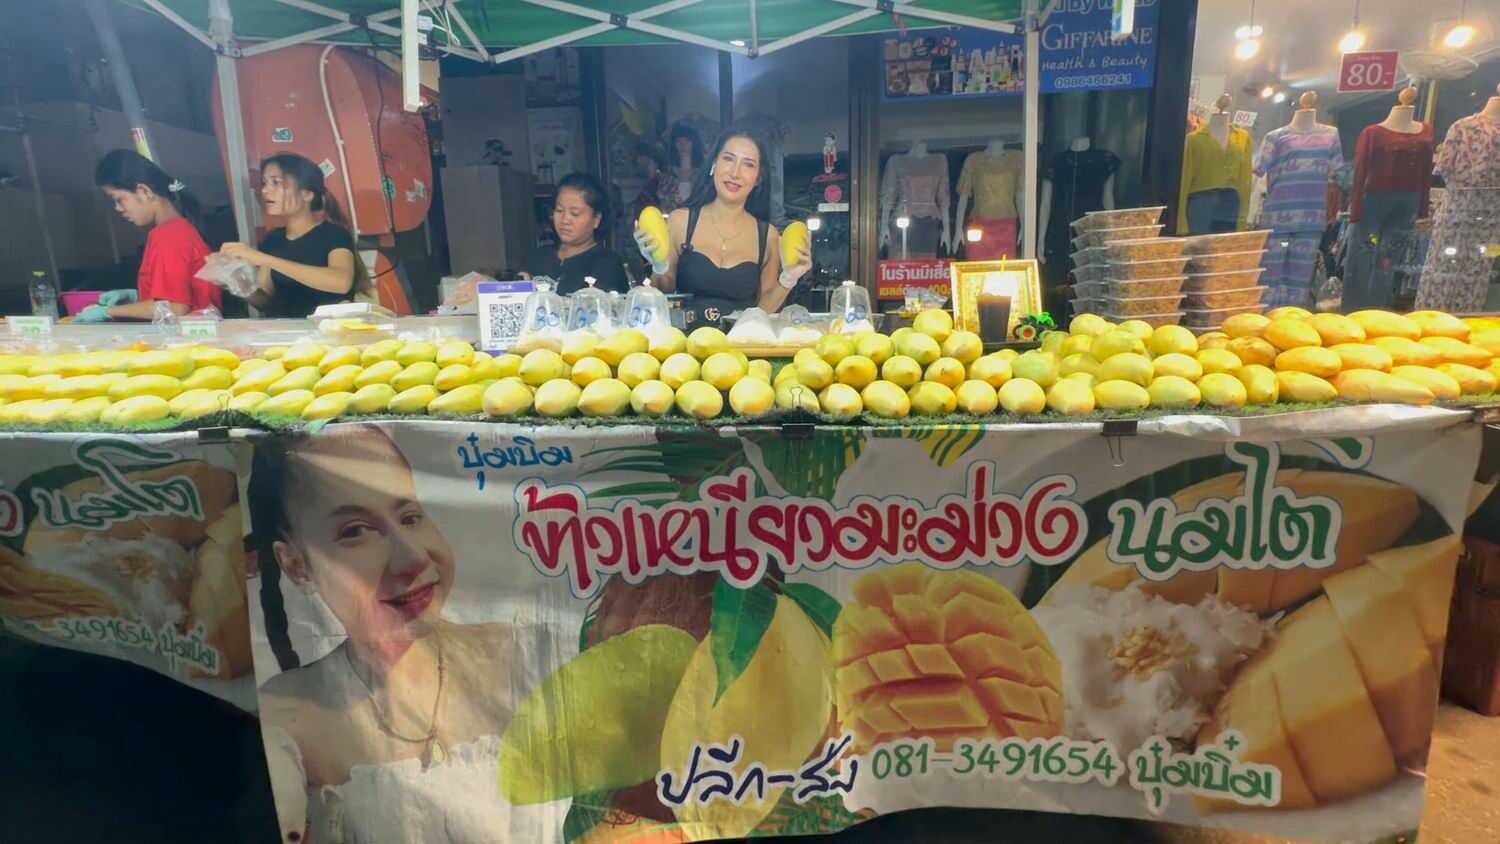 Big boobed Thai woman's mango sticky rice stall a hit in Mae Klong | News by Thaiger